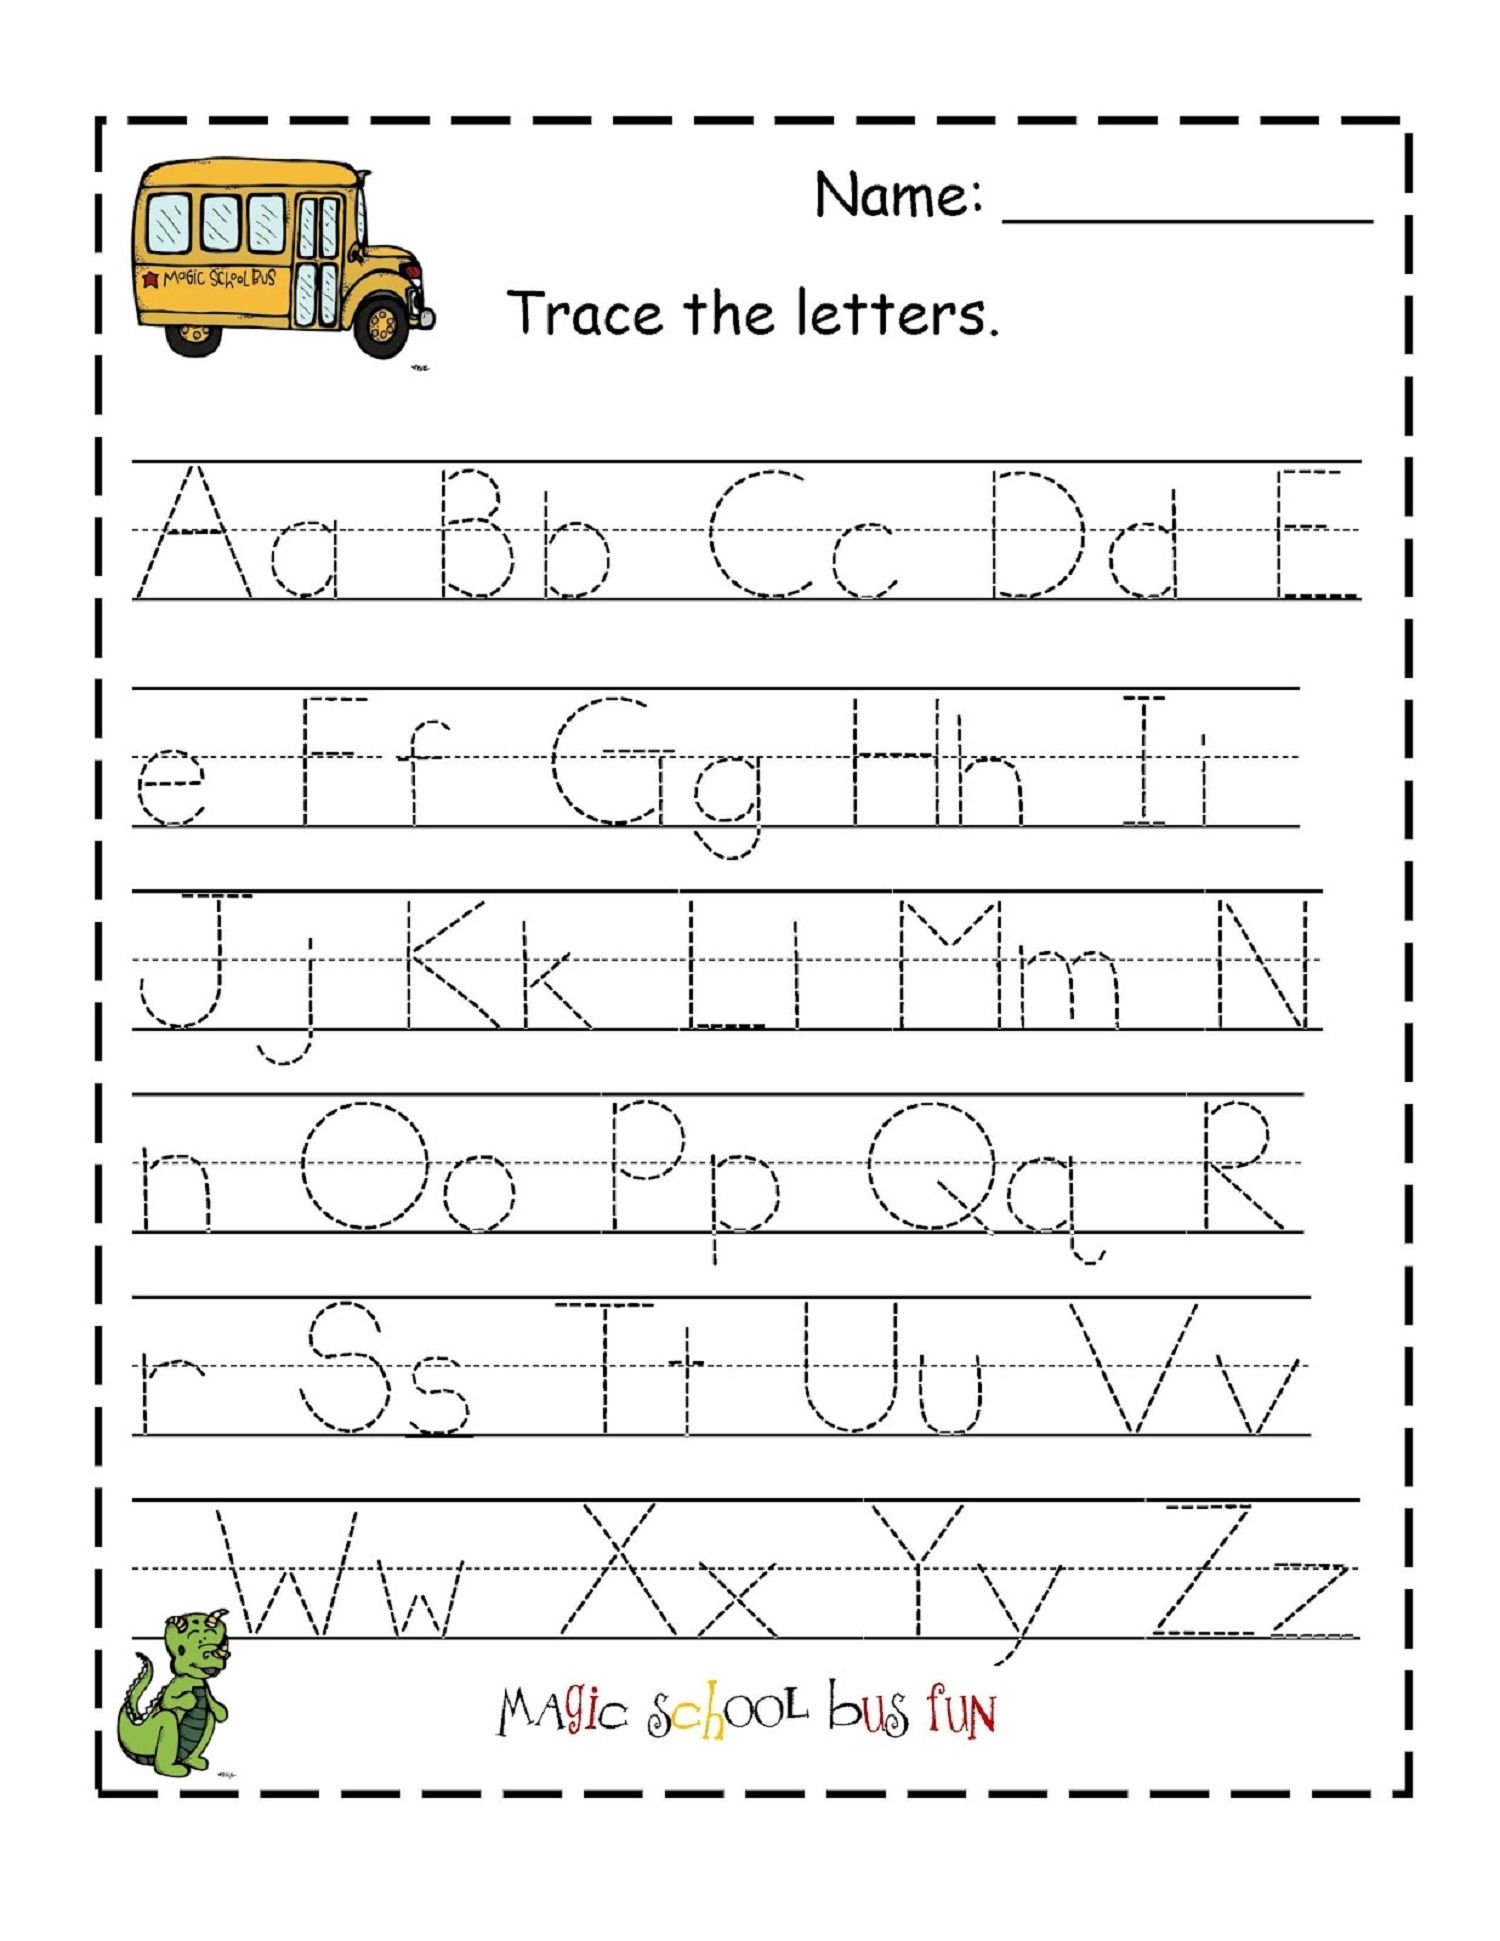 Traceable Alphabet For Learning Exercise | Letter Tracing in How To Make Dotted Letters For Tracing